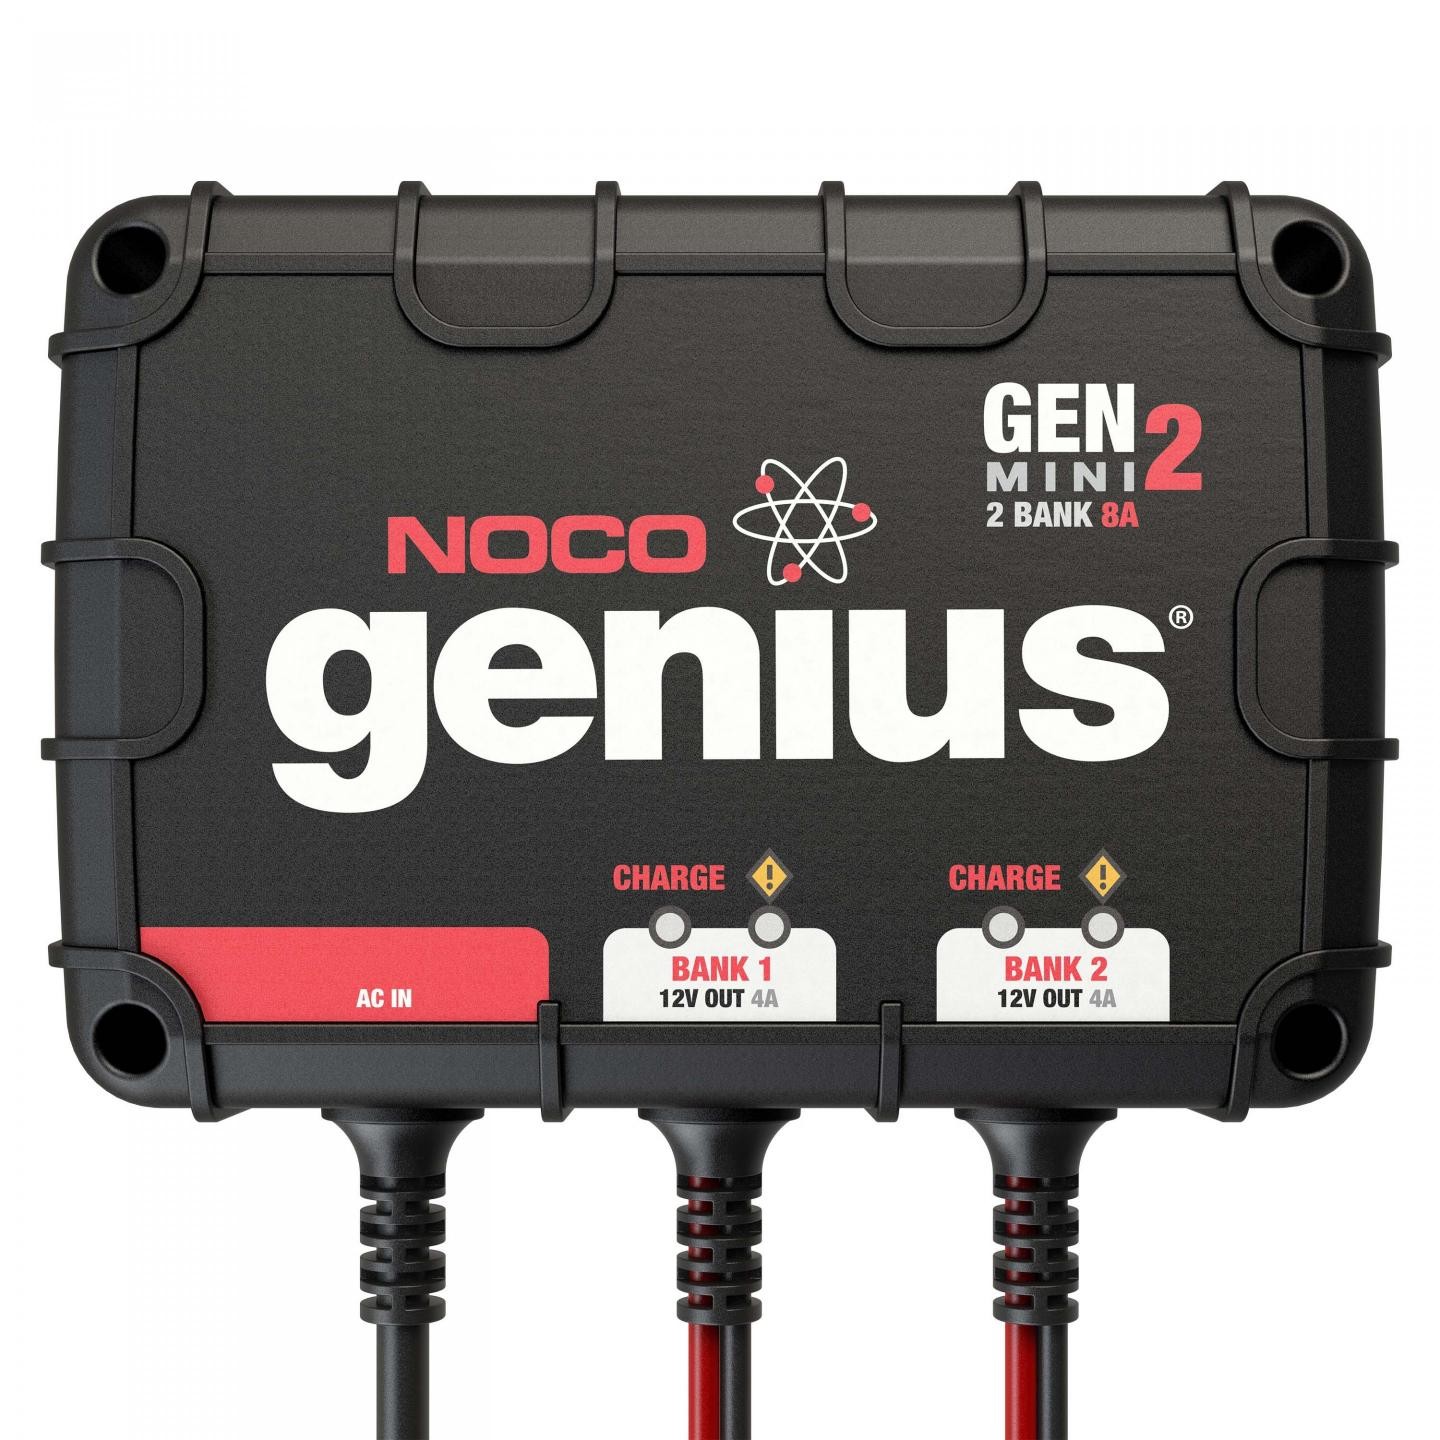 Noco Genius 5 Battery Charger for 6 and 12 Volt Batteries - BCM